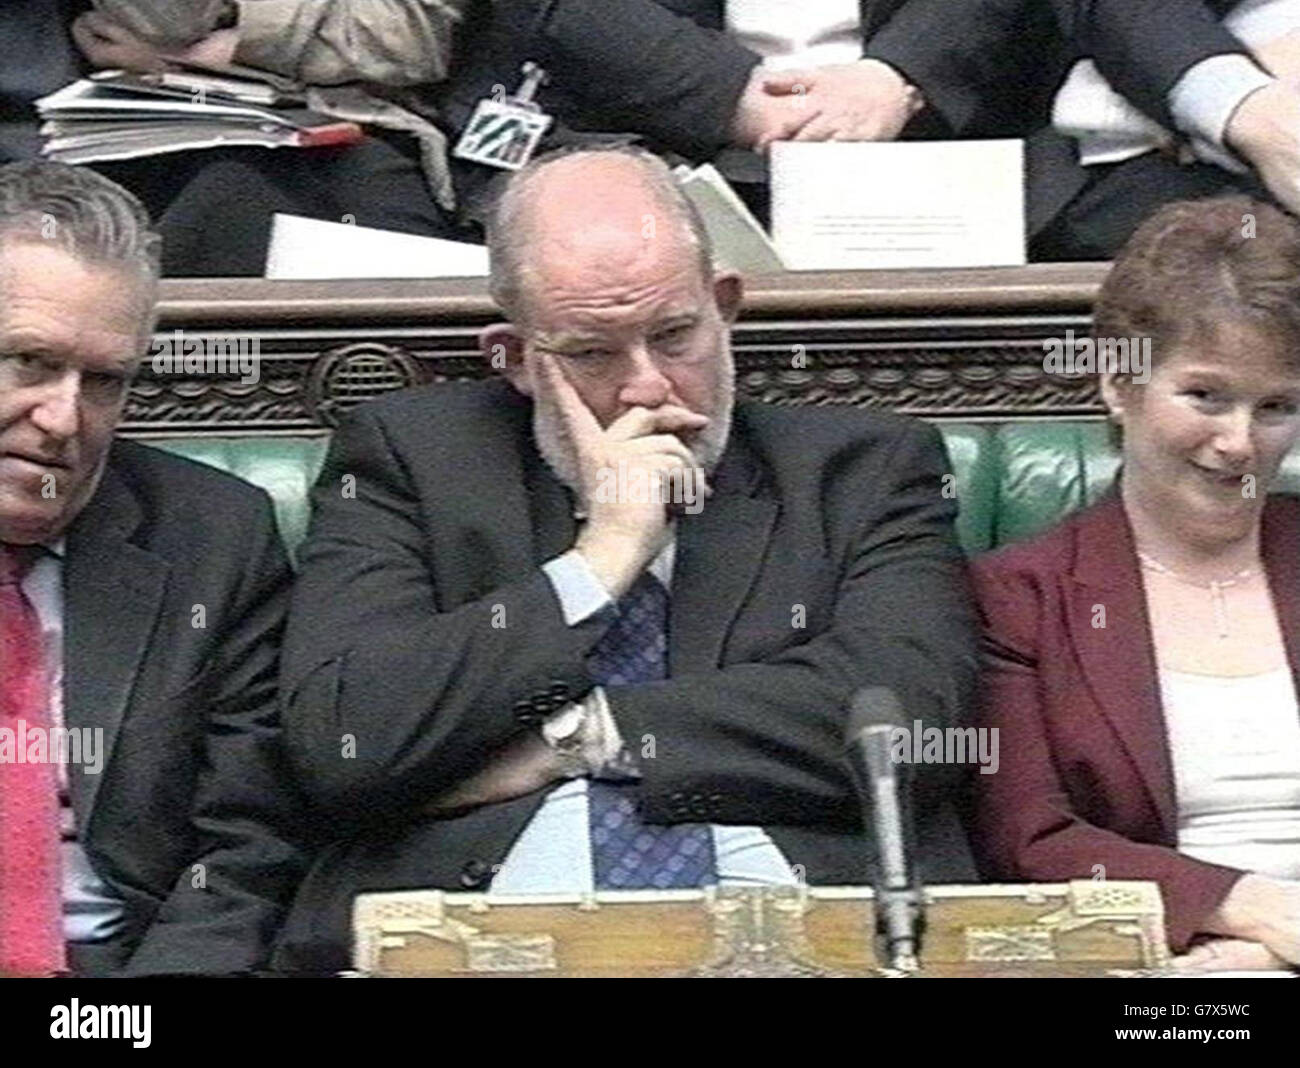 Debating the Prevention of Terrorism Bill - House of Commons. Home Secretary Charles Clarke listens to the debate. Stock Photo